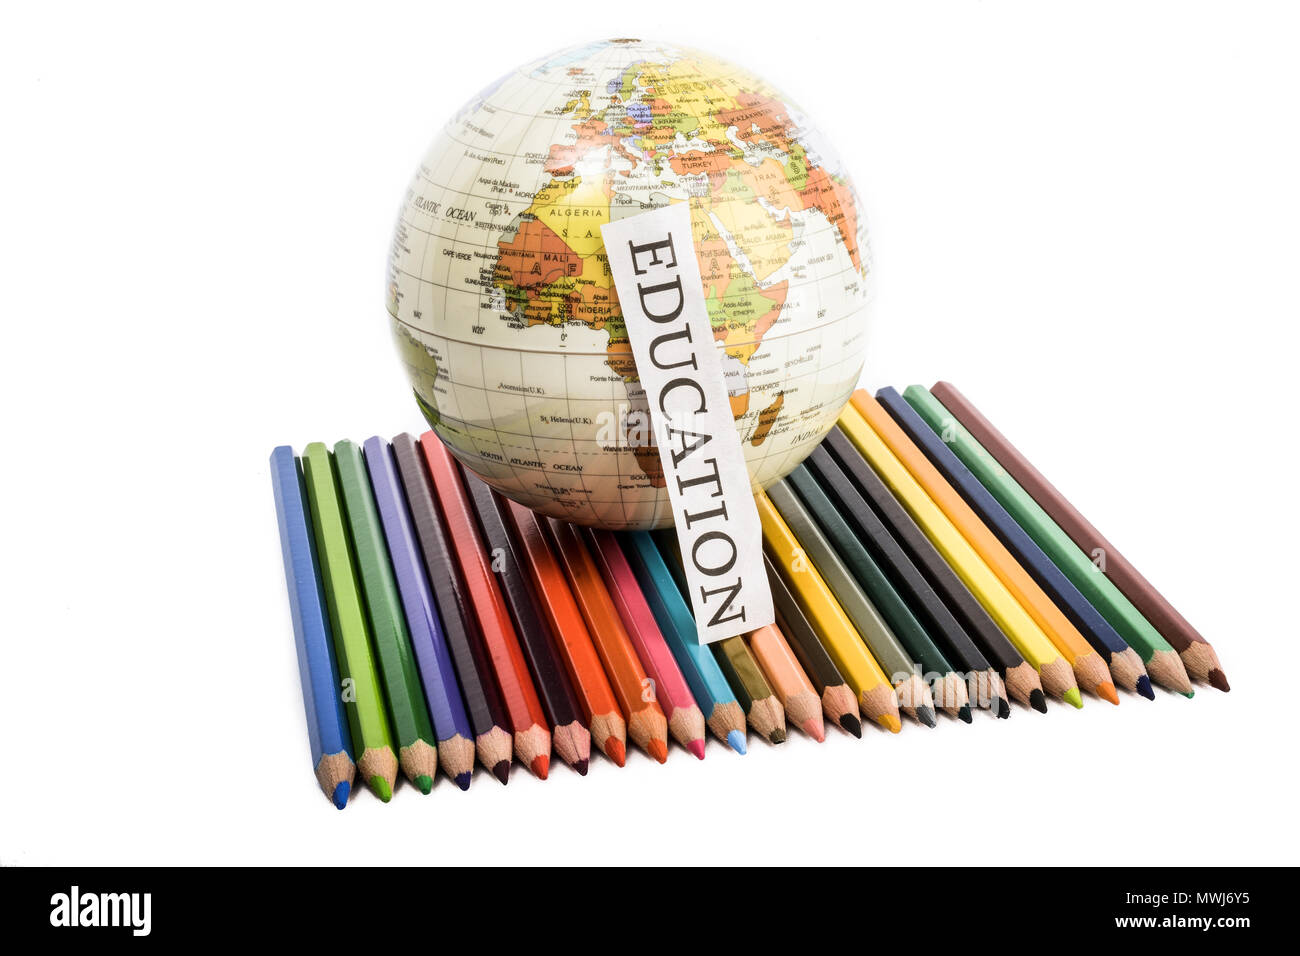 Colour pencils with globe and education note on them on a white background Stock Photo